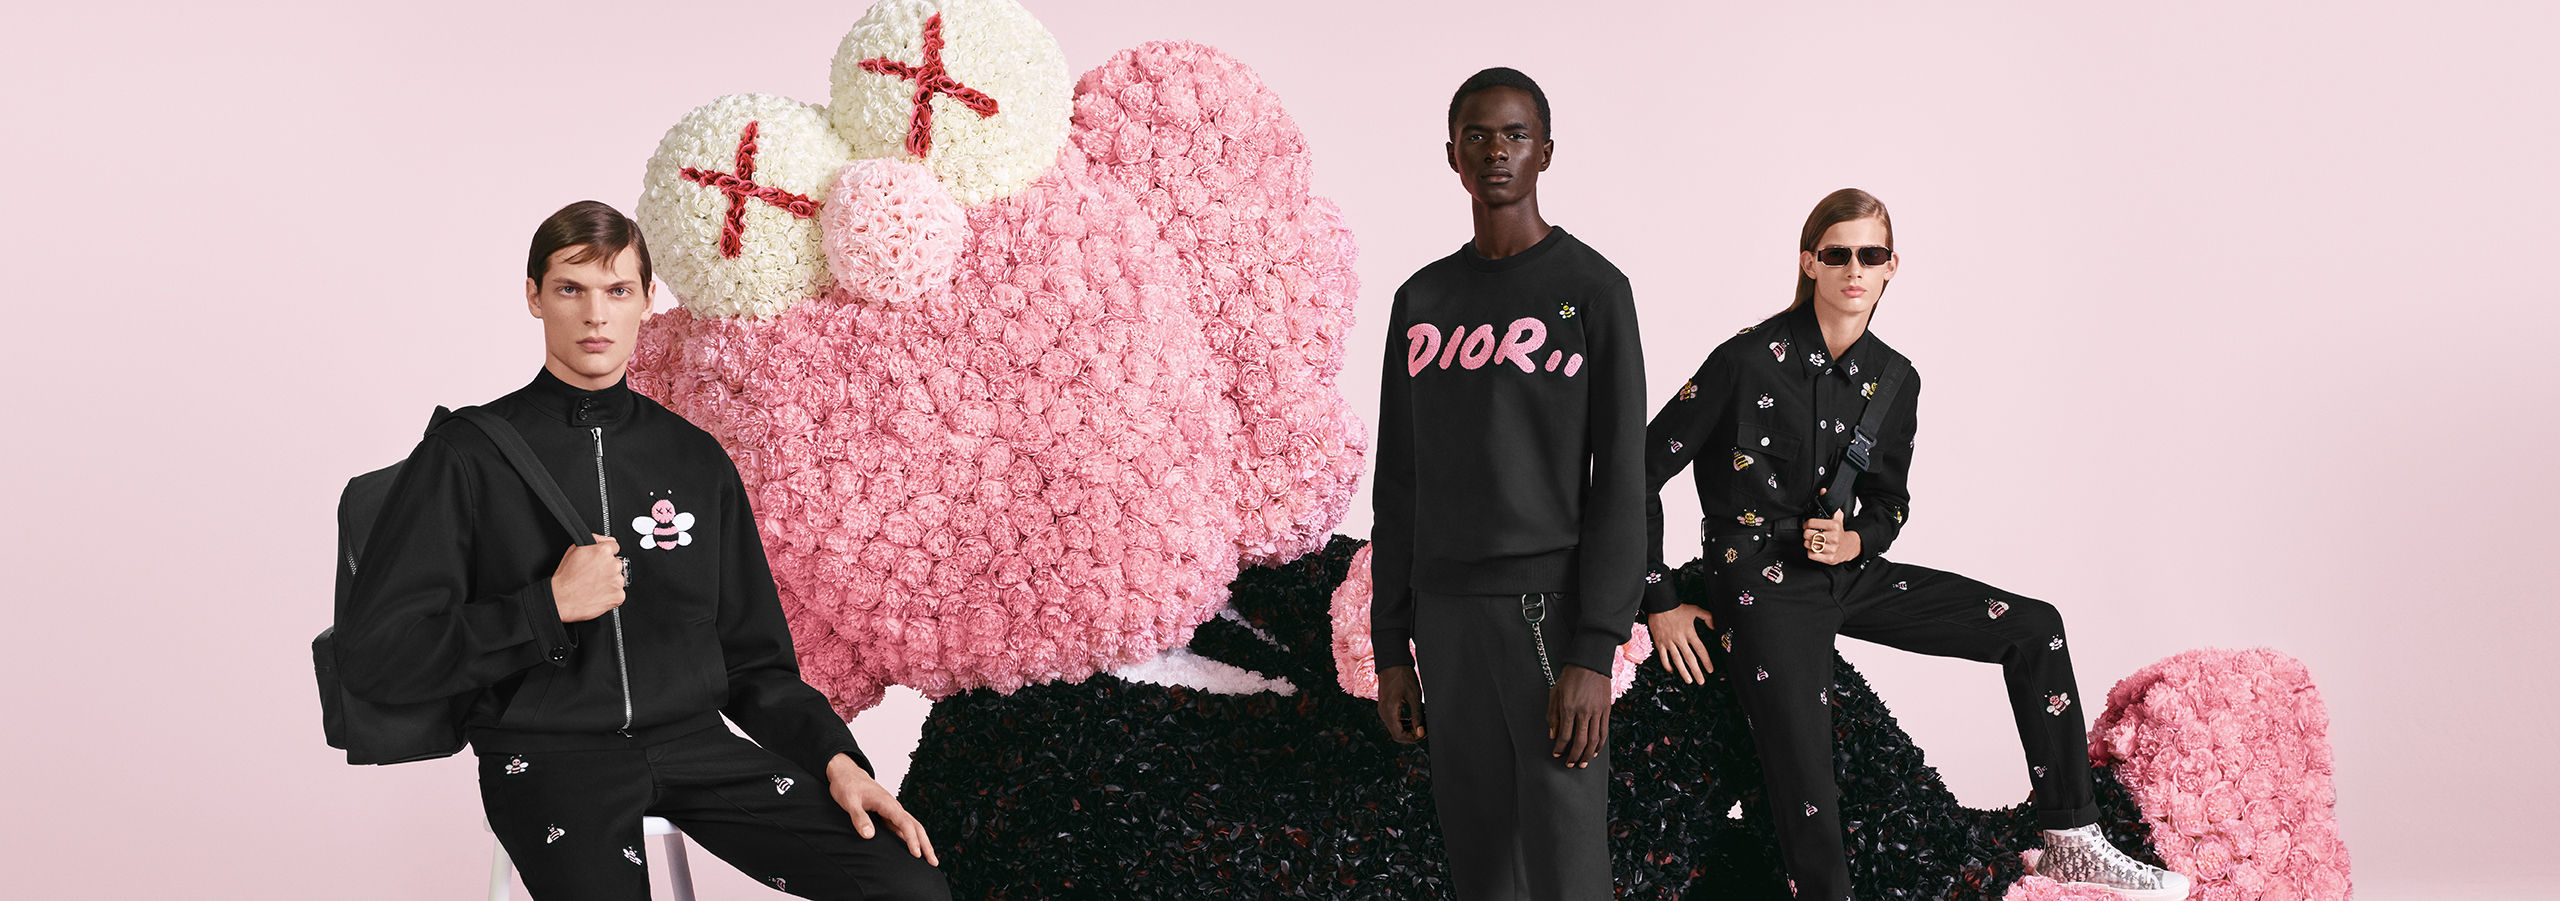 Livestream: Front Row at Pre-Fall 2019 Dior Homme Show